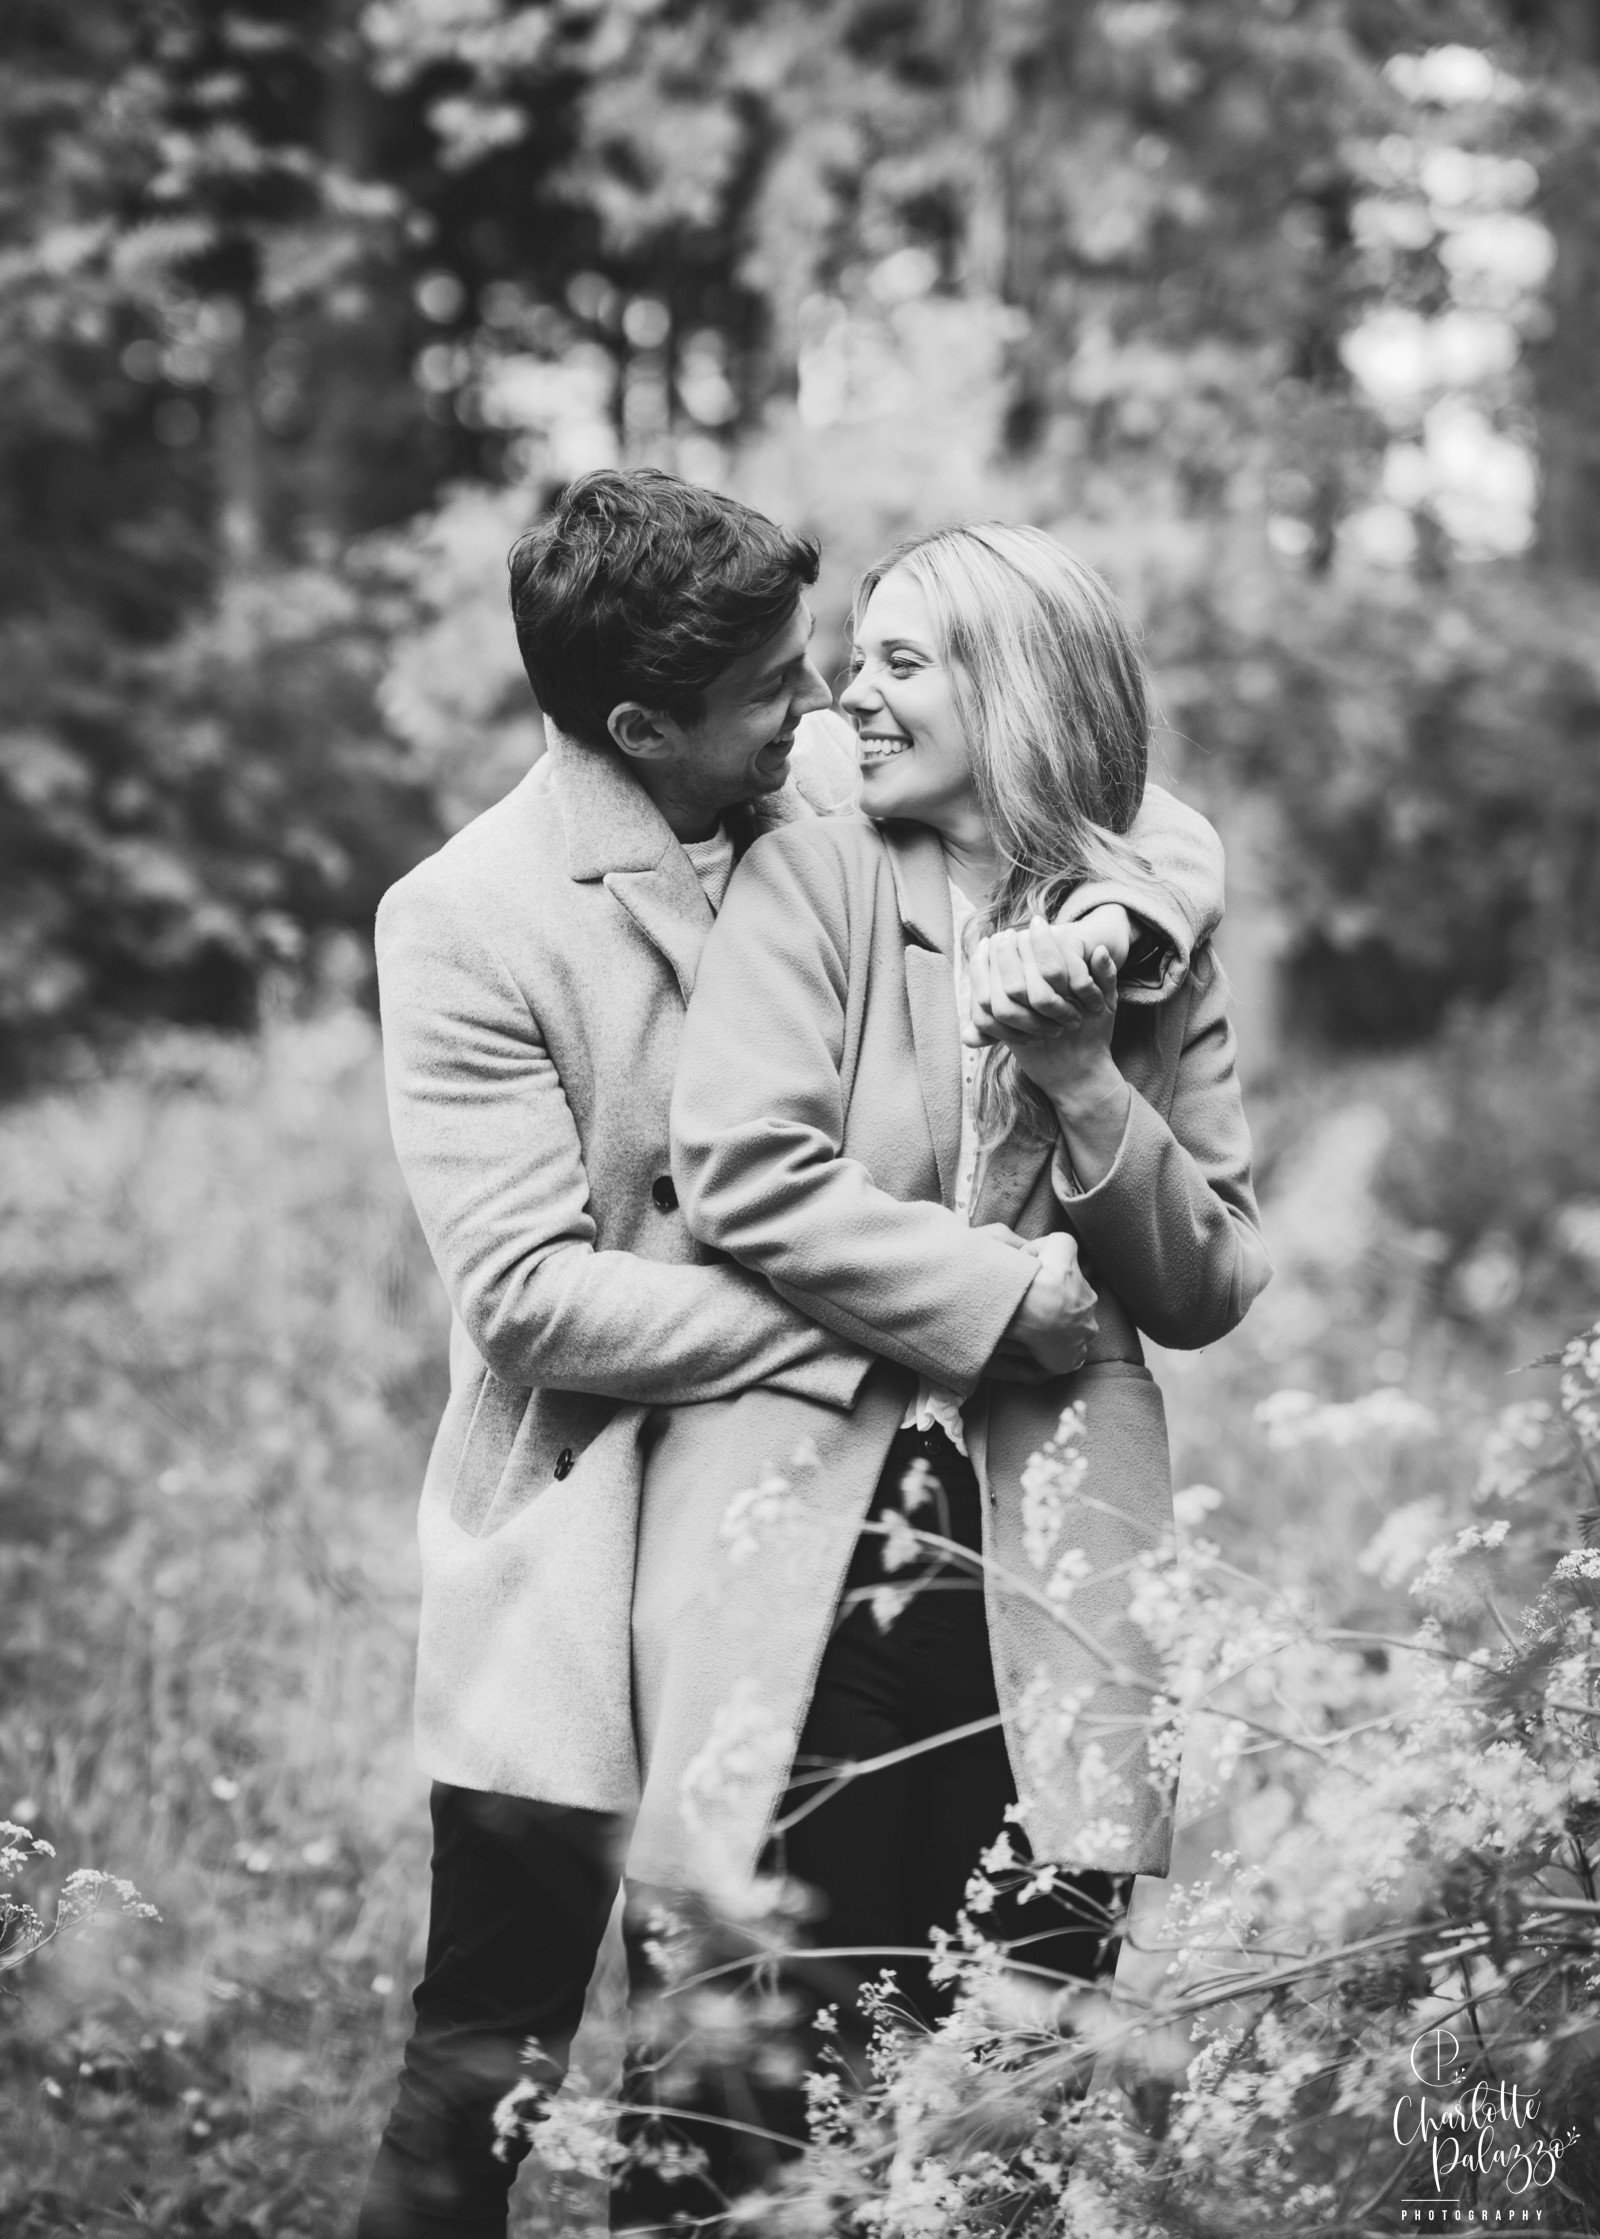 Holly_James_Engagement_session_Macclesfield_Forest_Cheshire_Wedding_Photographer_0011.jpg